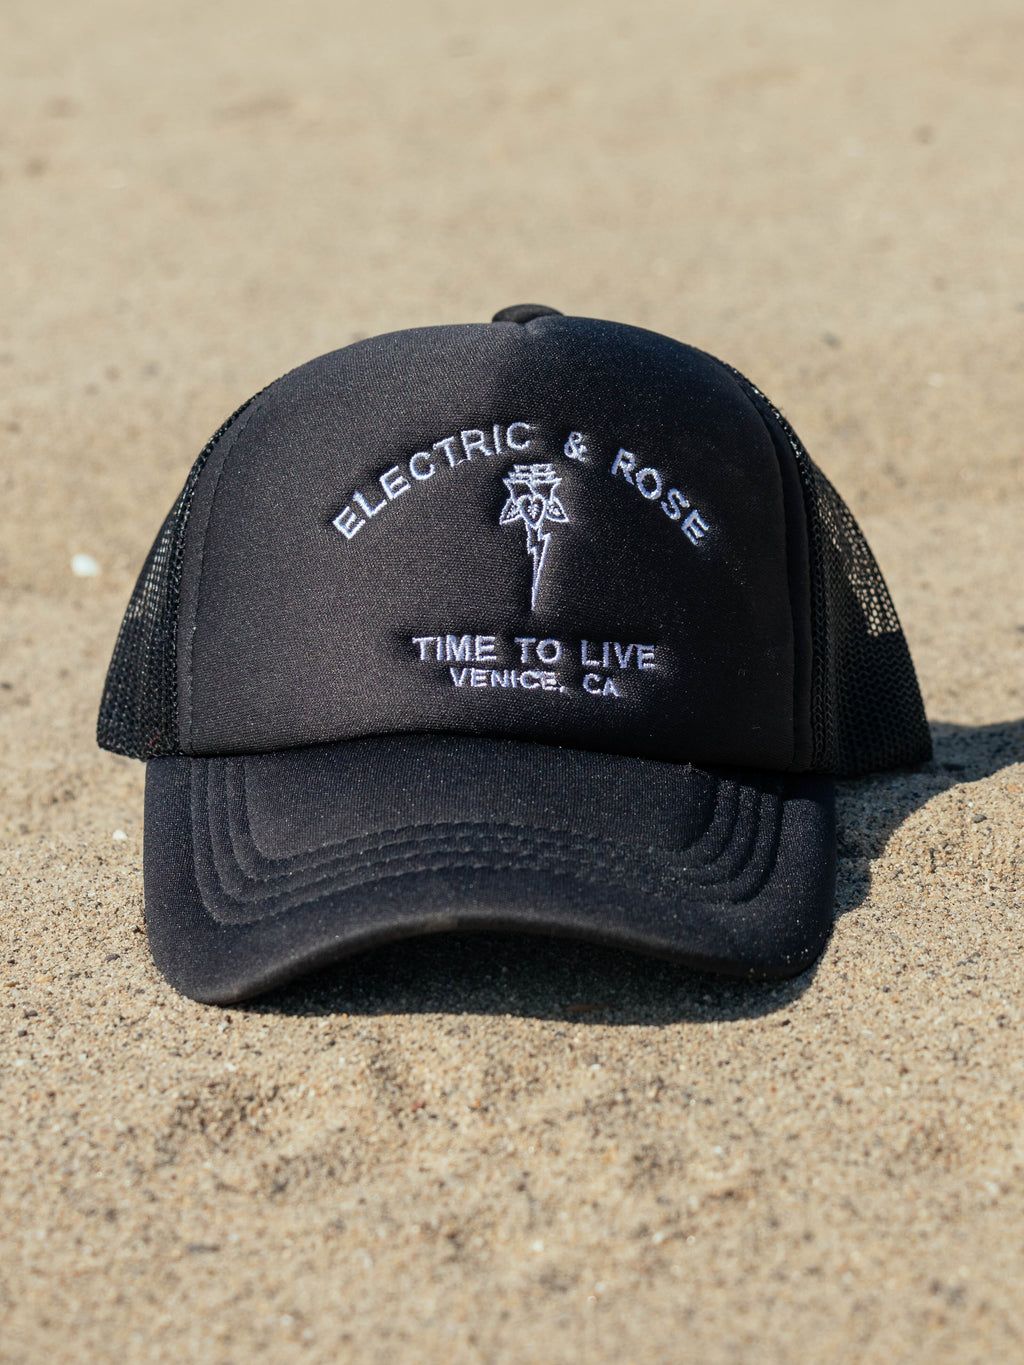 E&R - Time to Live Hat